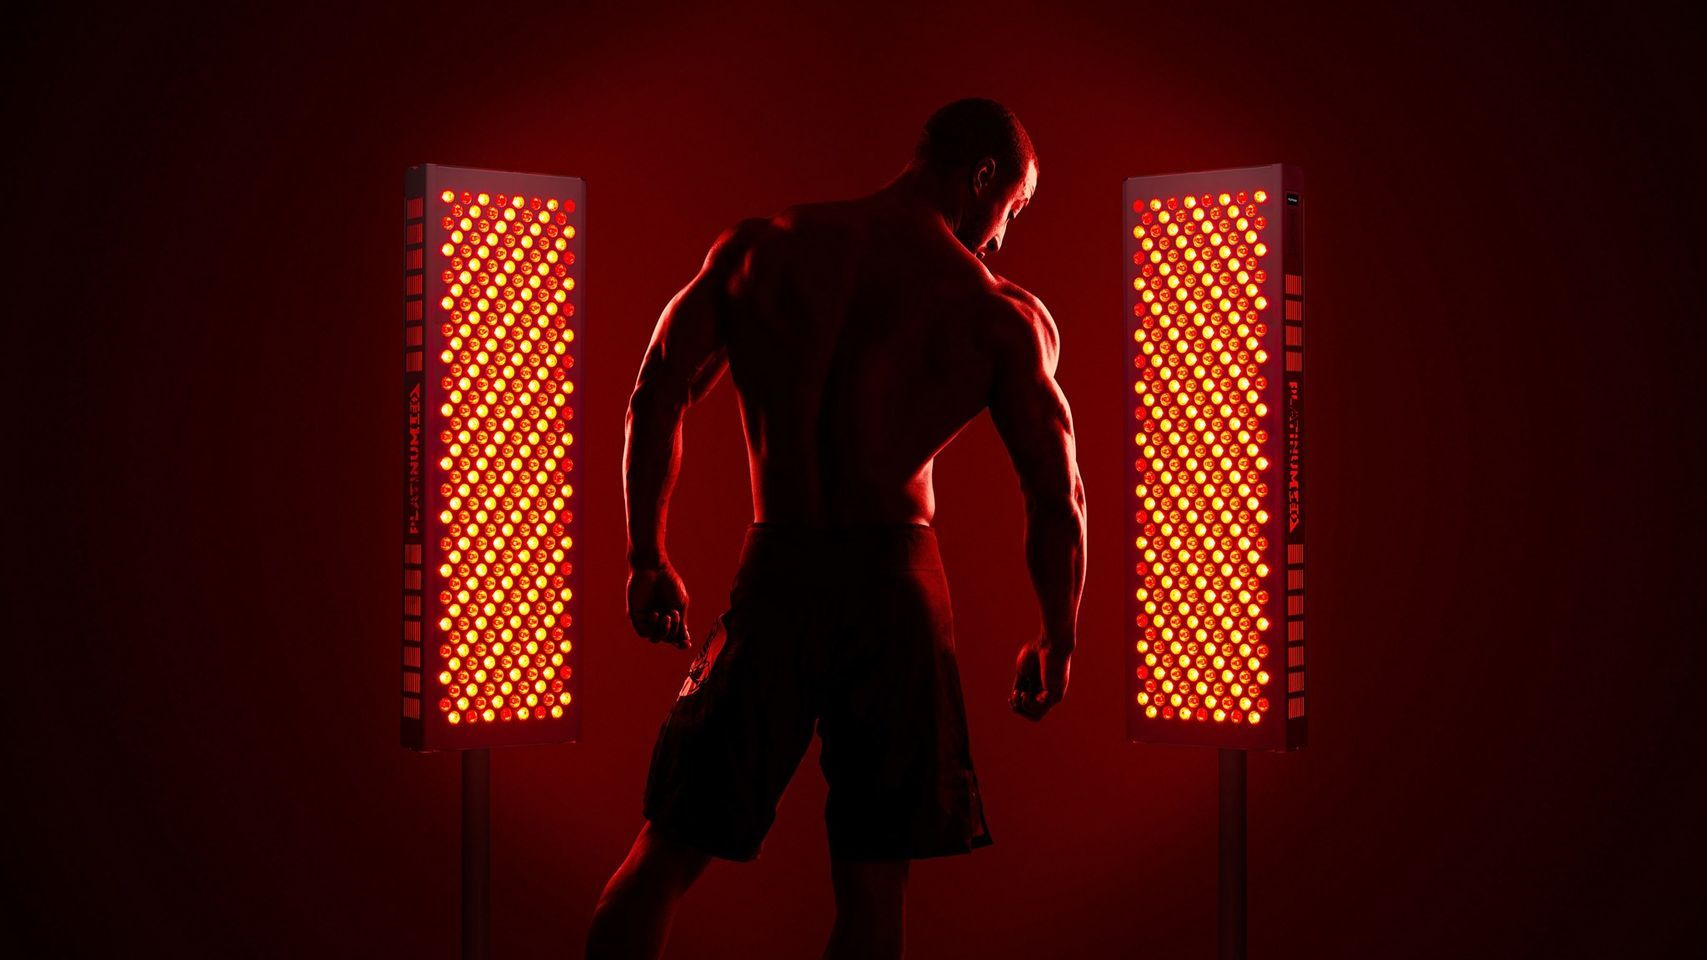 A man is standing in front of two red lights in a dark room.